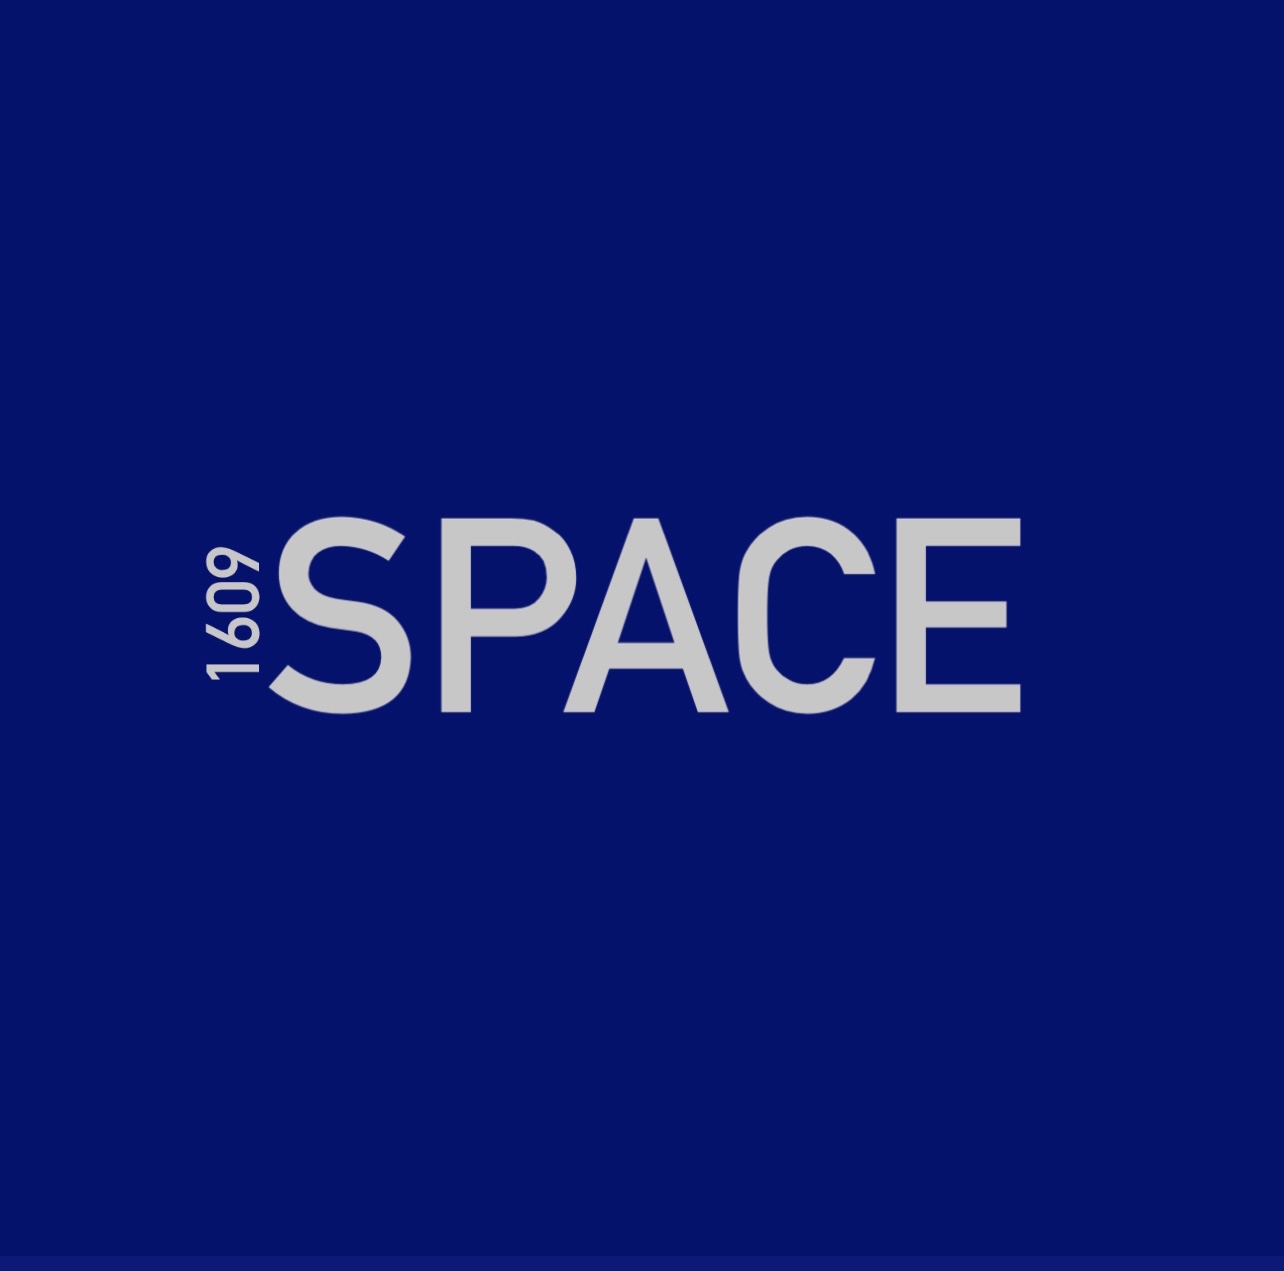 1609 SPACE